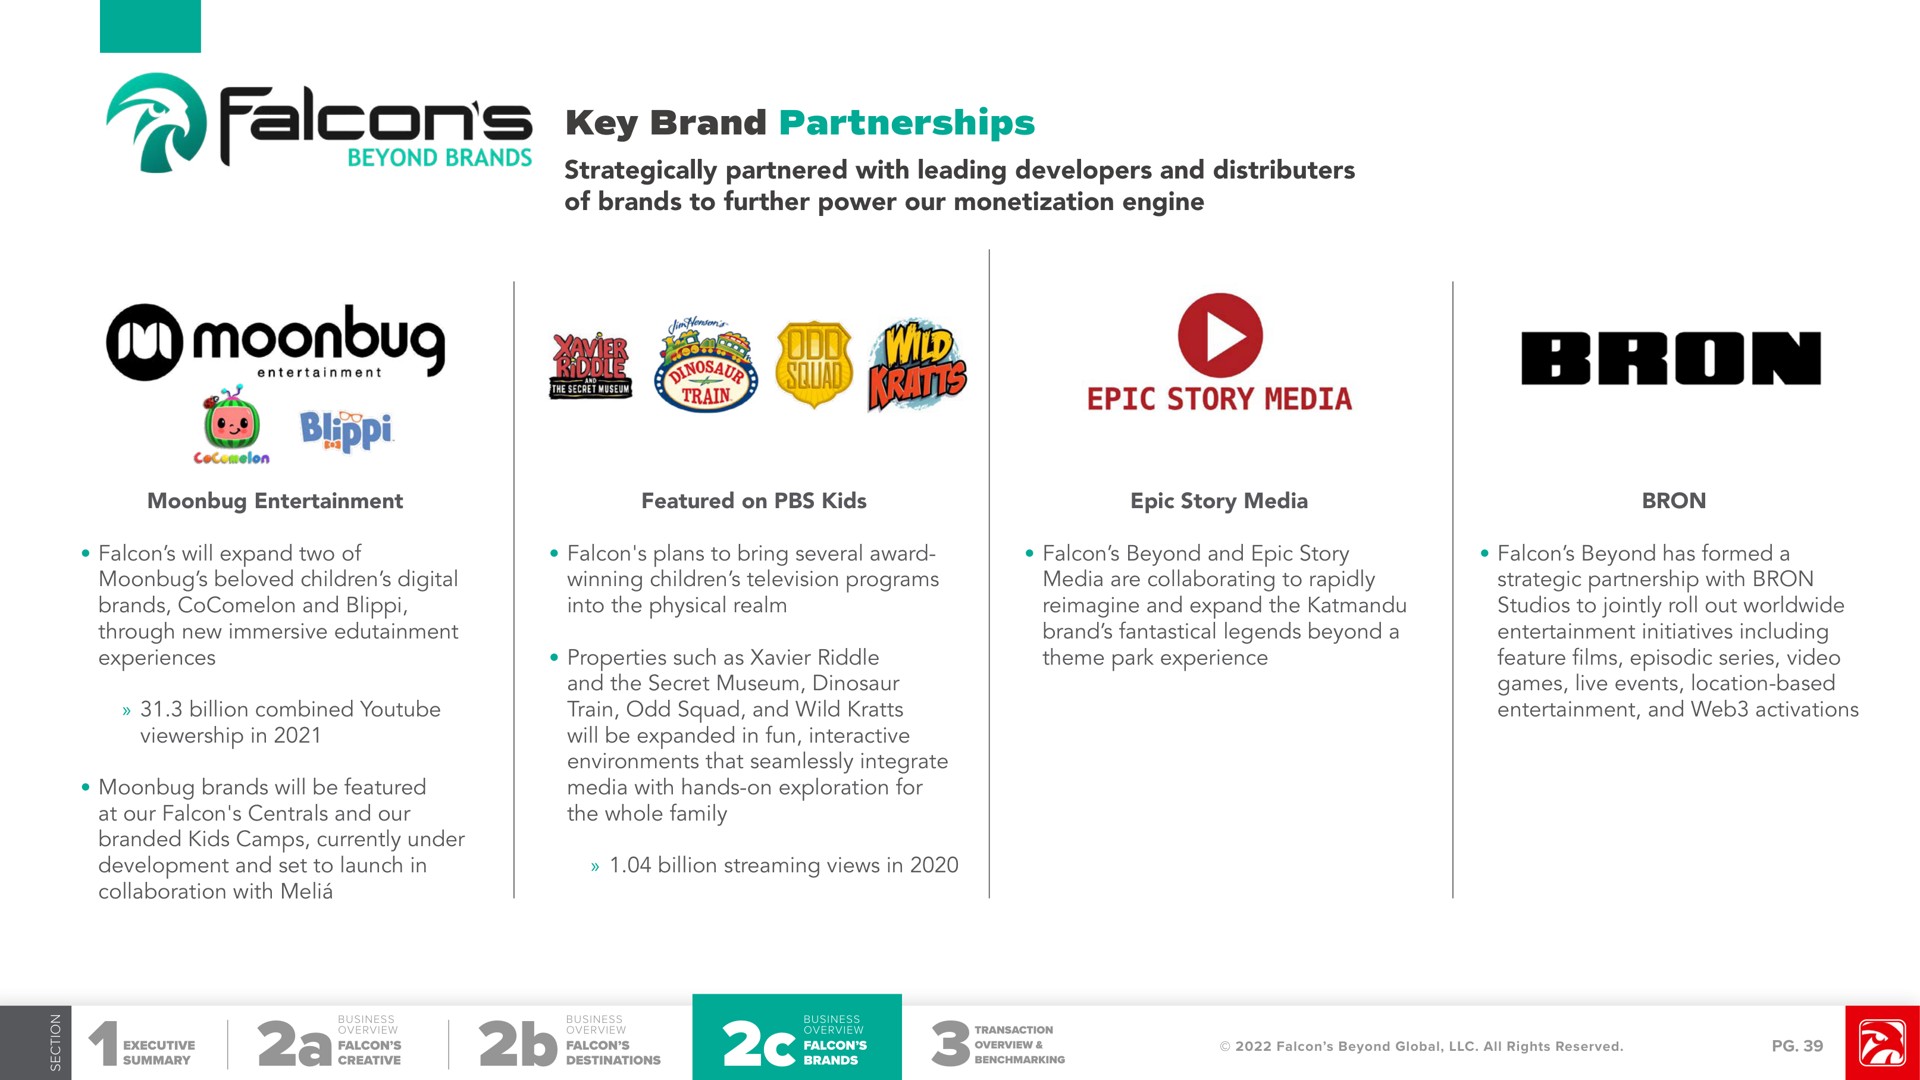 key brand partnerships strategically partnered with leading developers and distributers of brands to further power our monetization engine he falcons epic story media | Falcon's Beyond